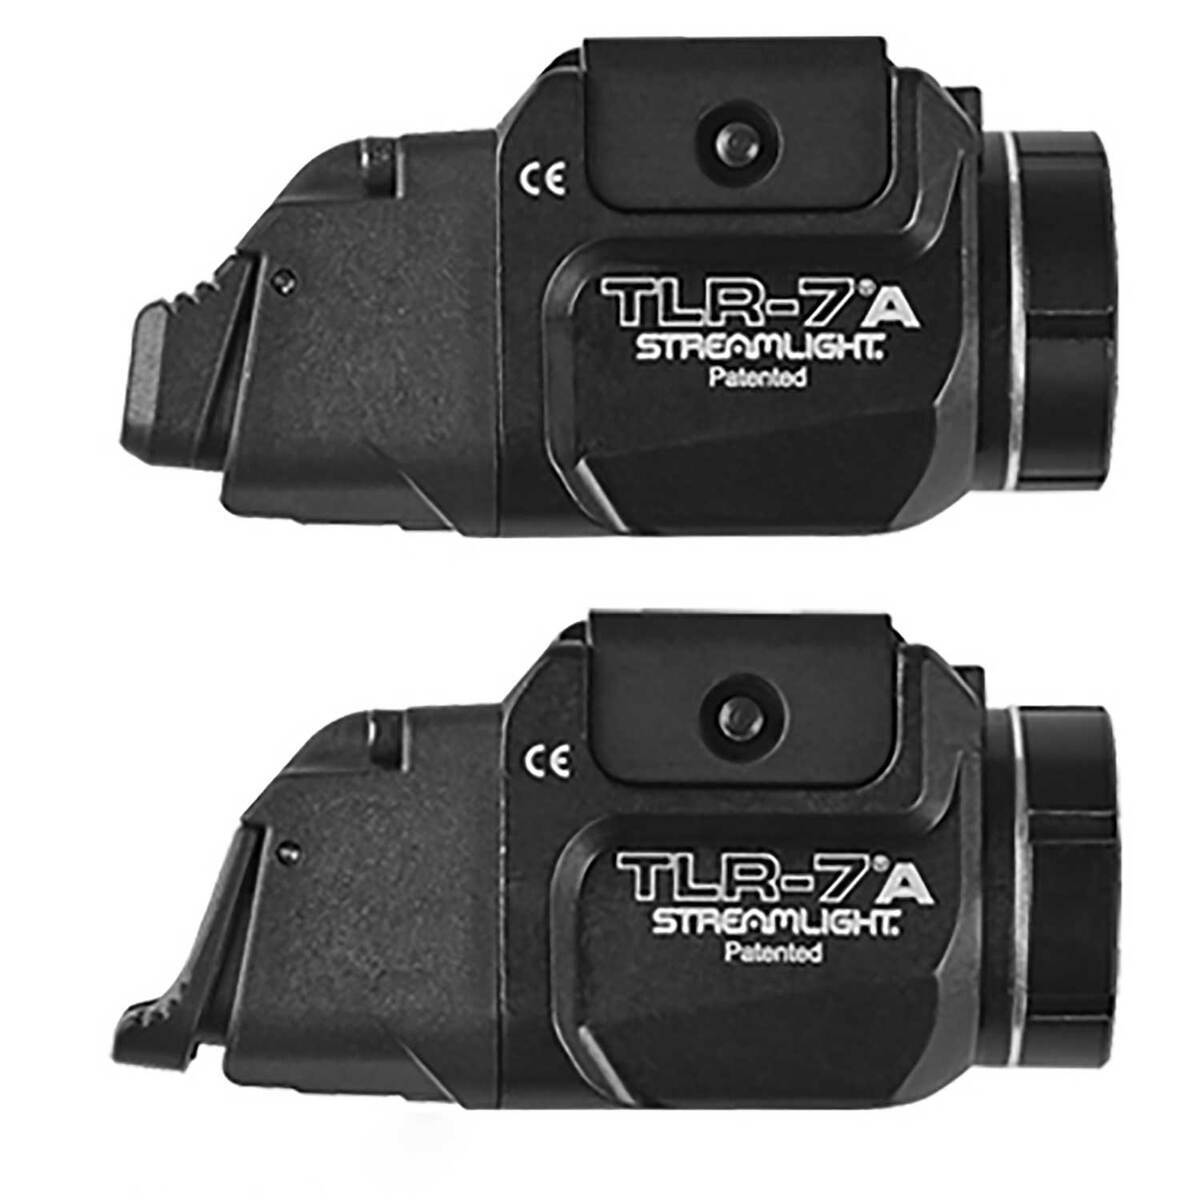 TLR-7A Gun Light with Rear Switch | Sportsman's Warehouse